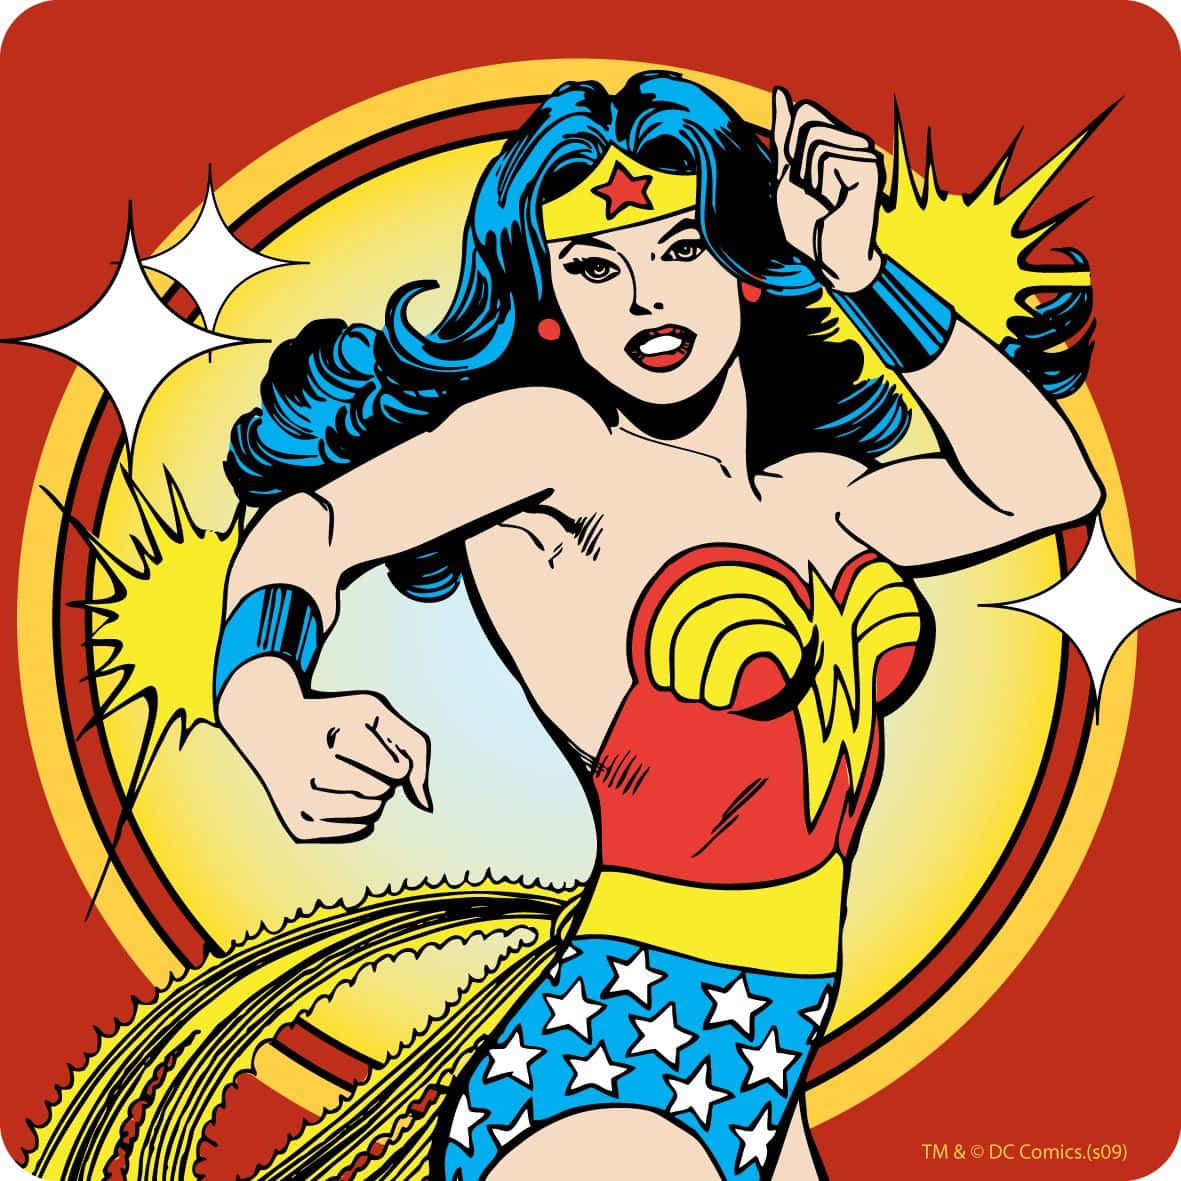 Wonder Woman is the iconic and powerful DC superhero.